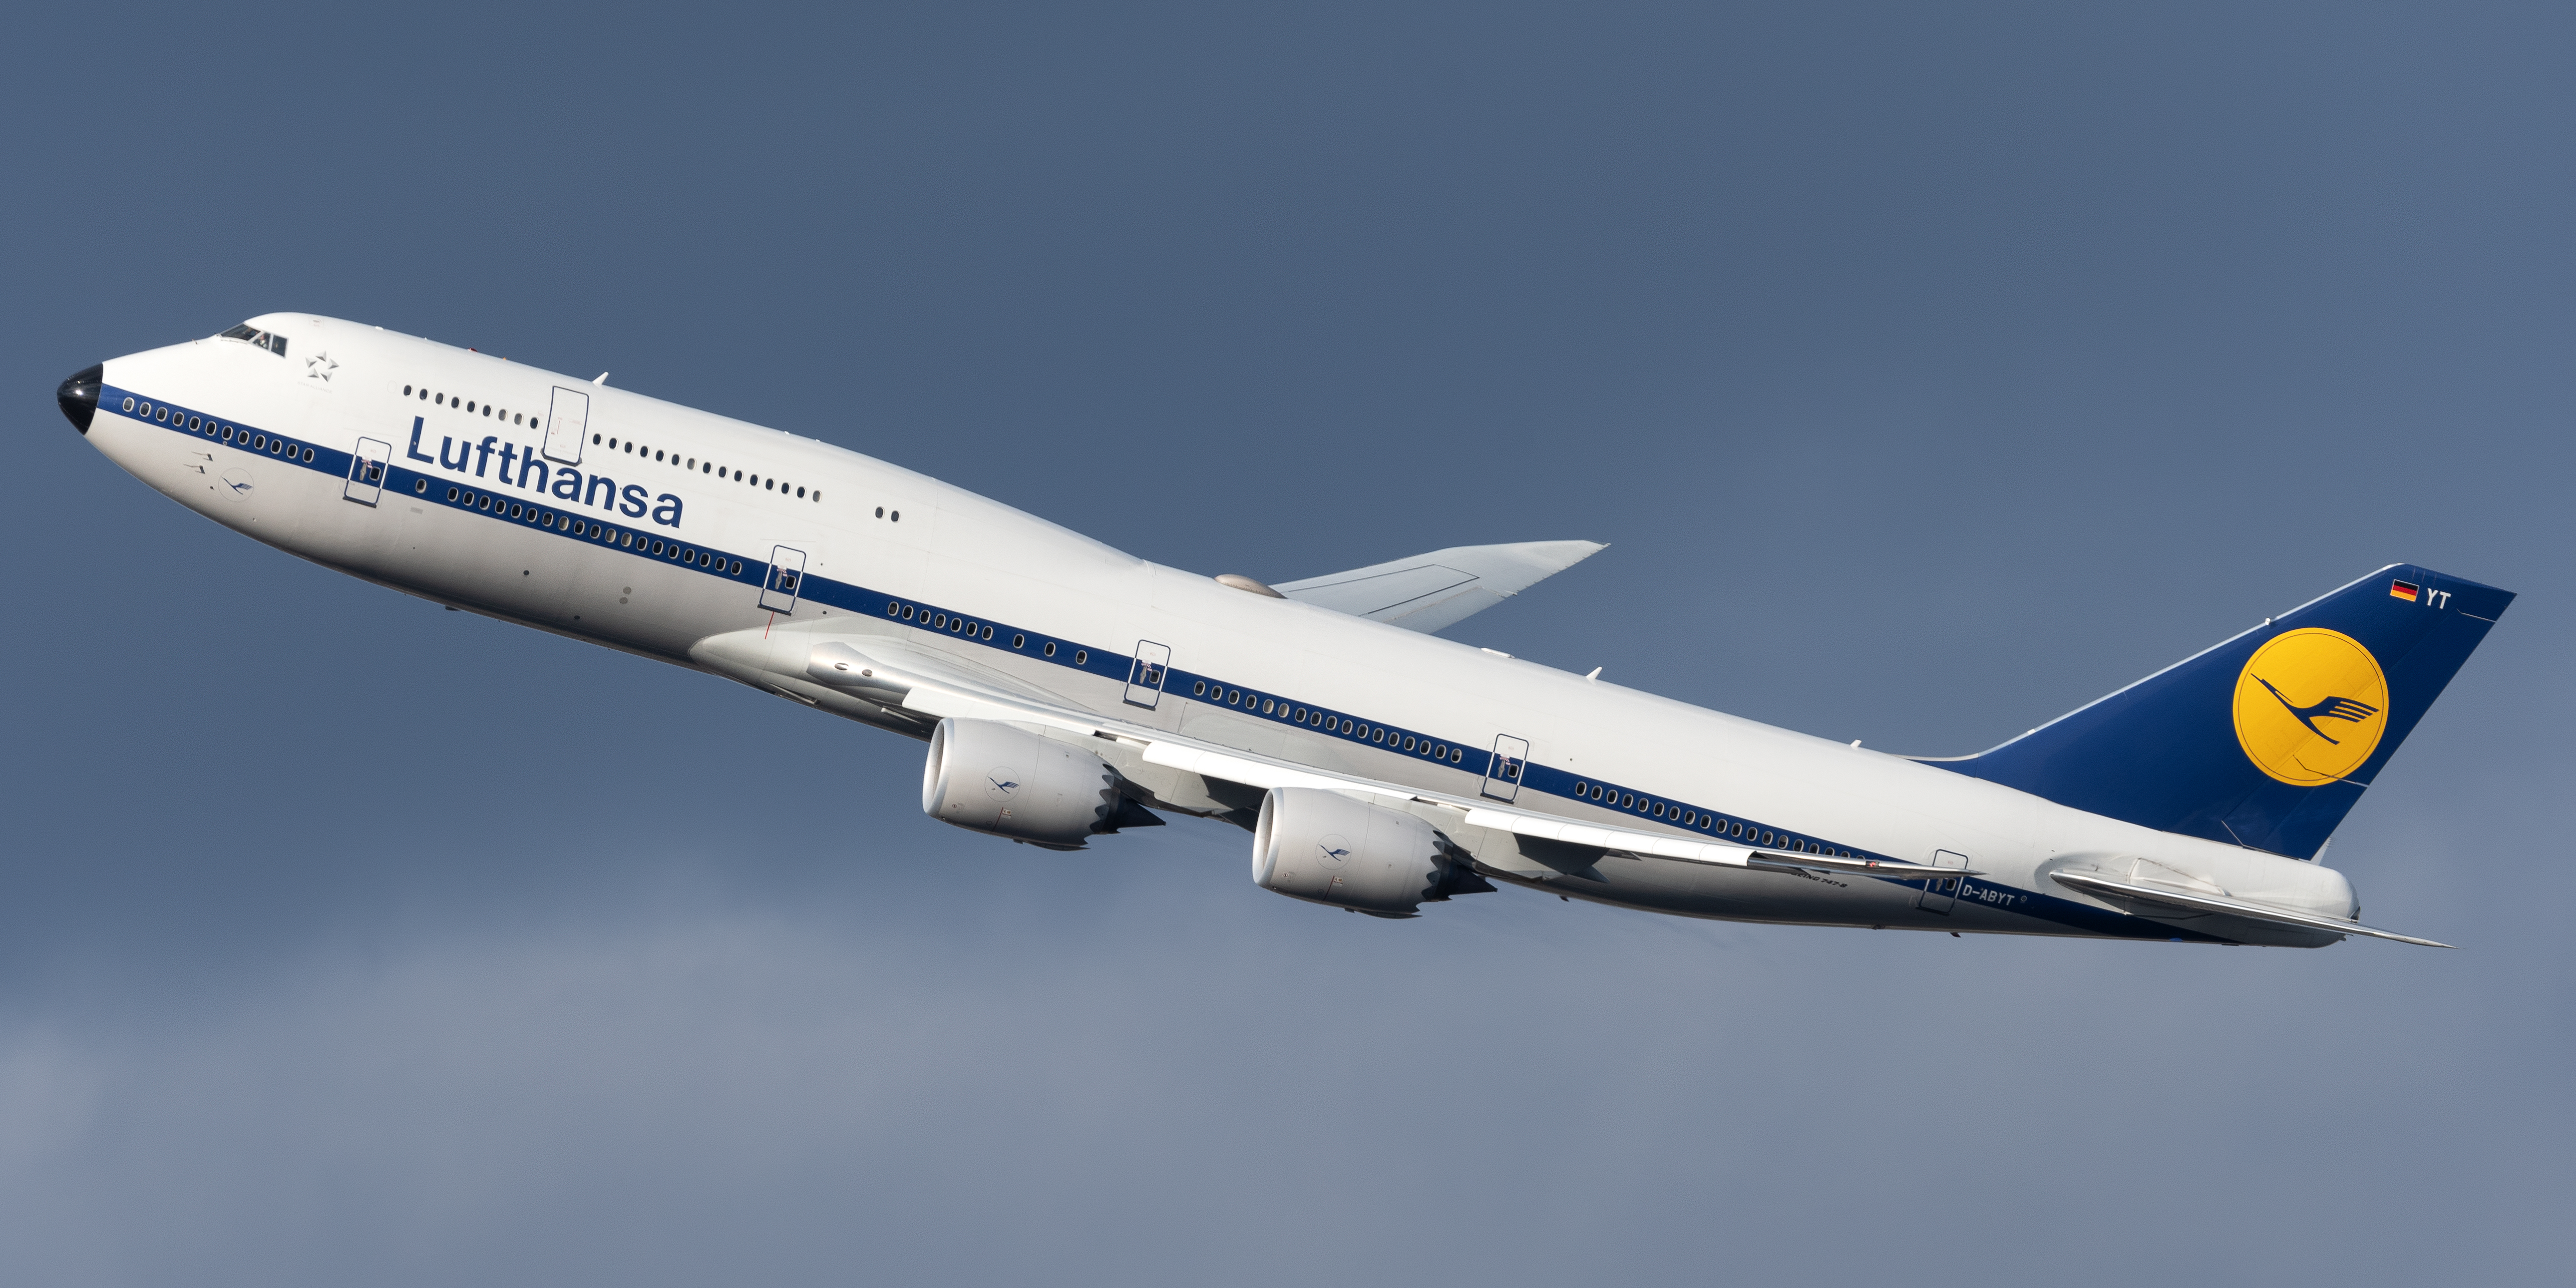 A Lufthansa Boeing 747-830 in Retro Livery flying in the sky.